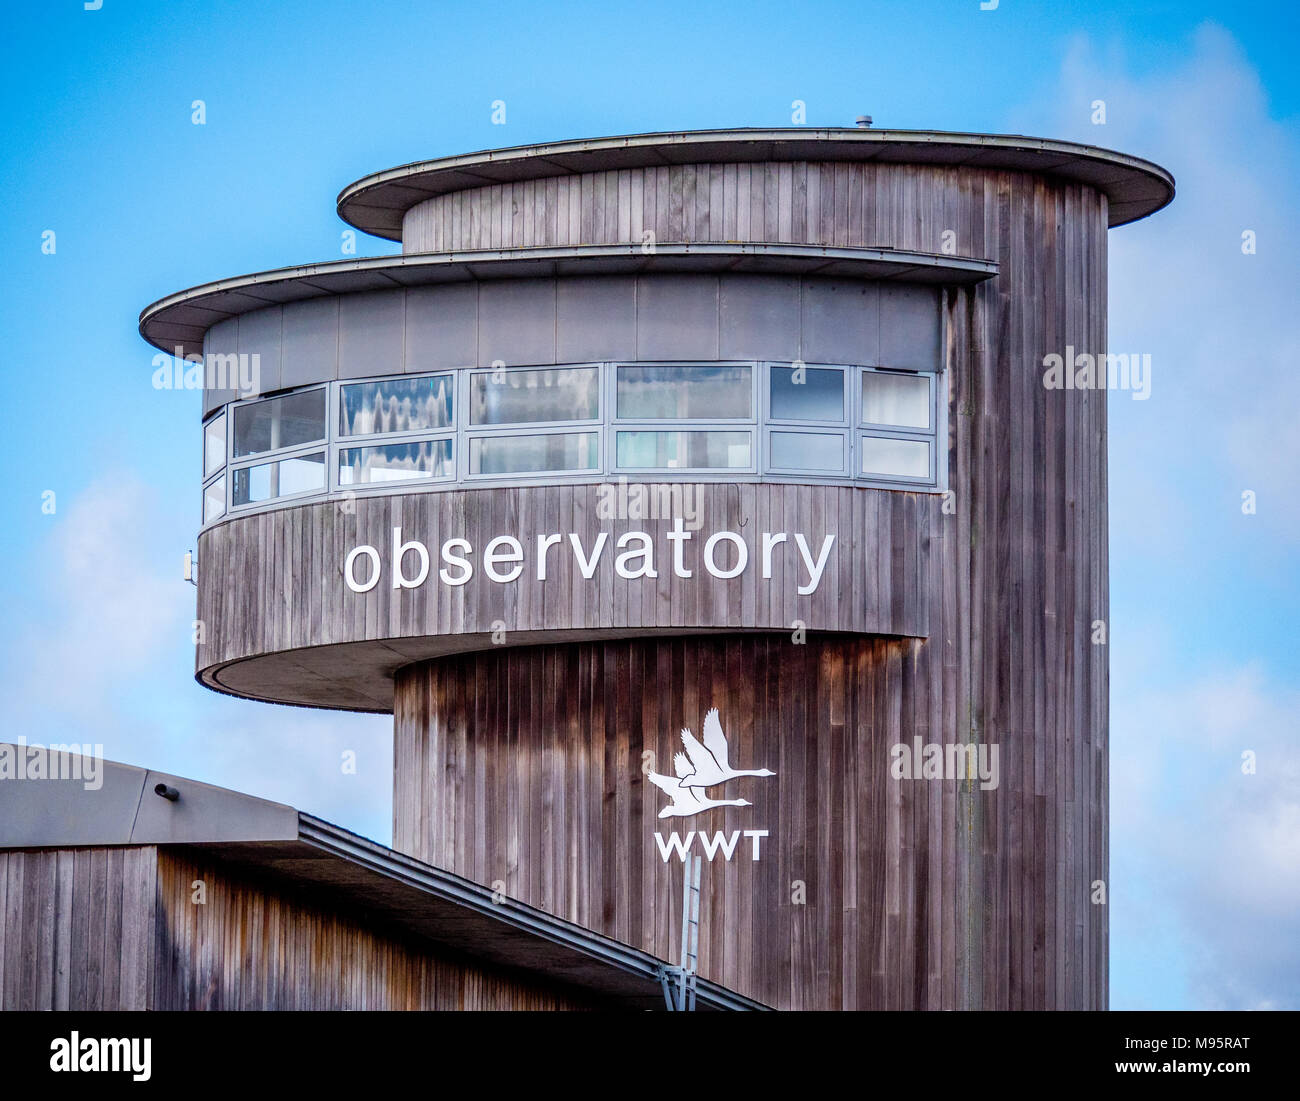 Severn View Observatory tower at Slimbridge Wildlife and Wetlands Centre Gloucestershire UK Stock Photo